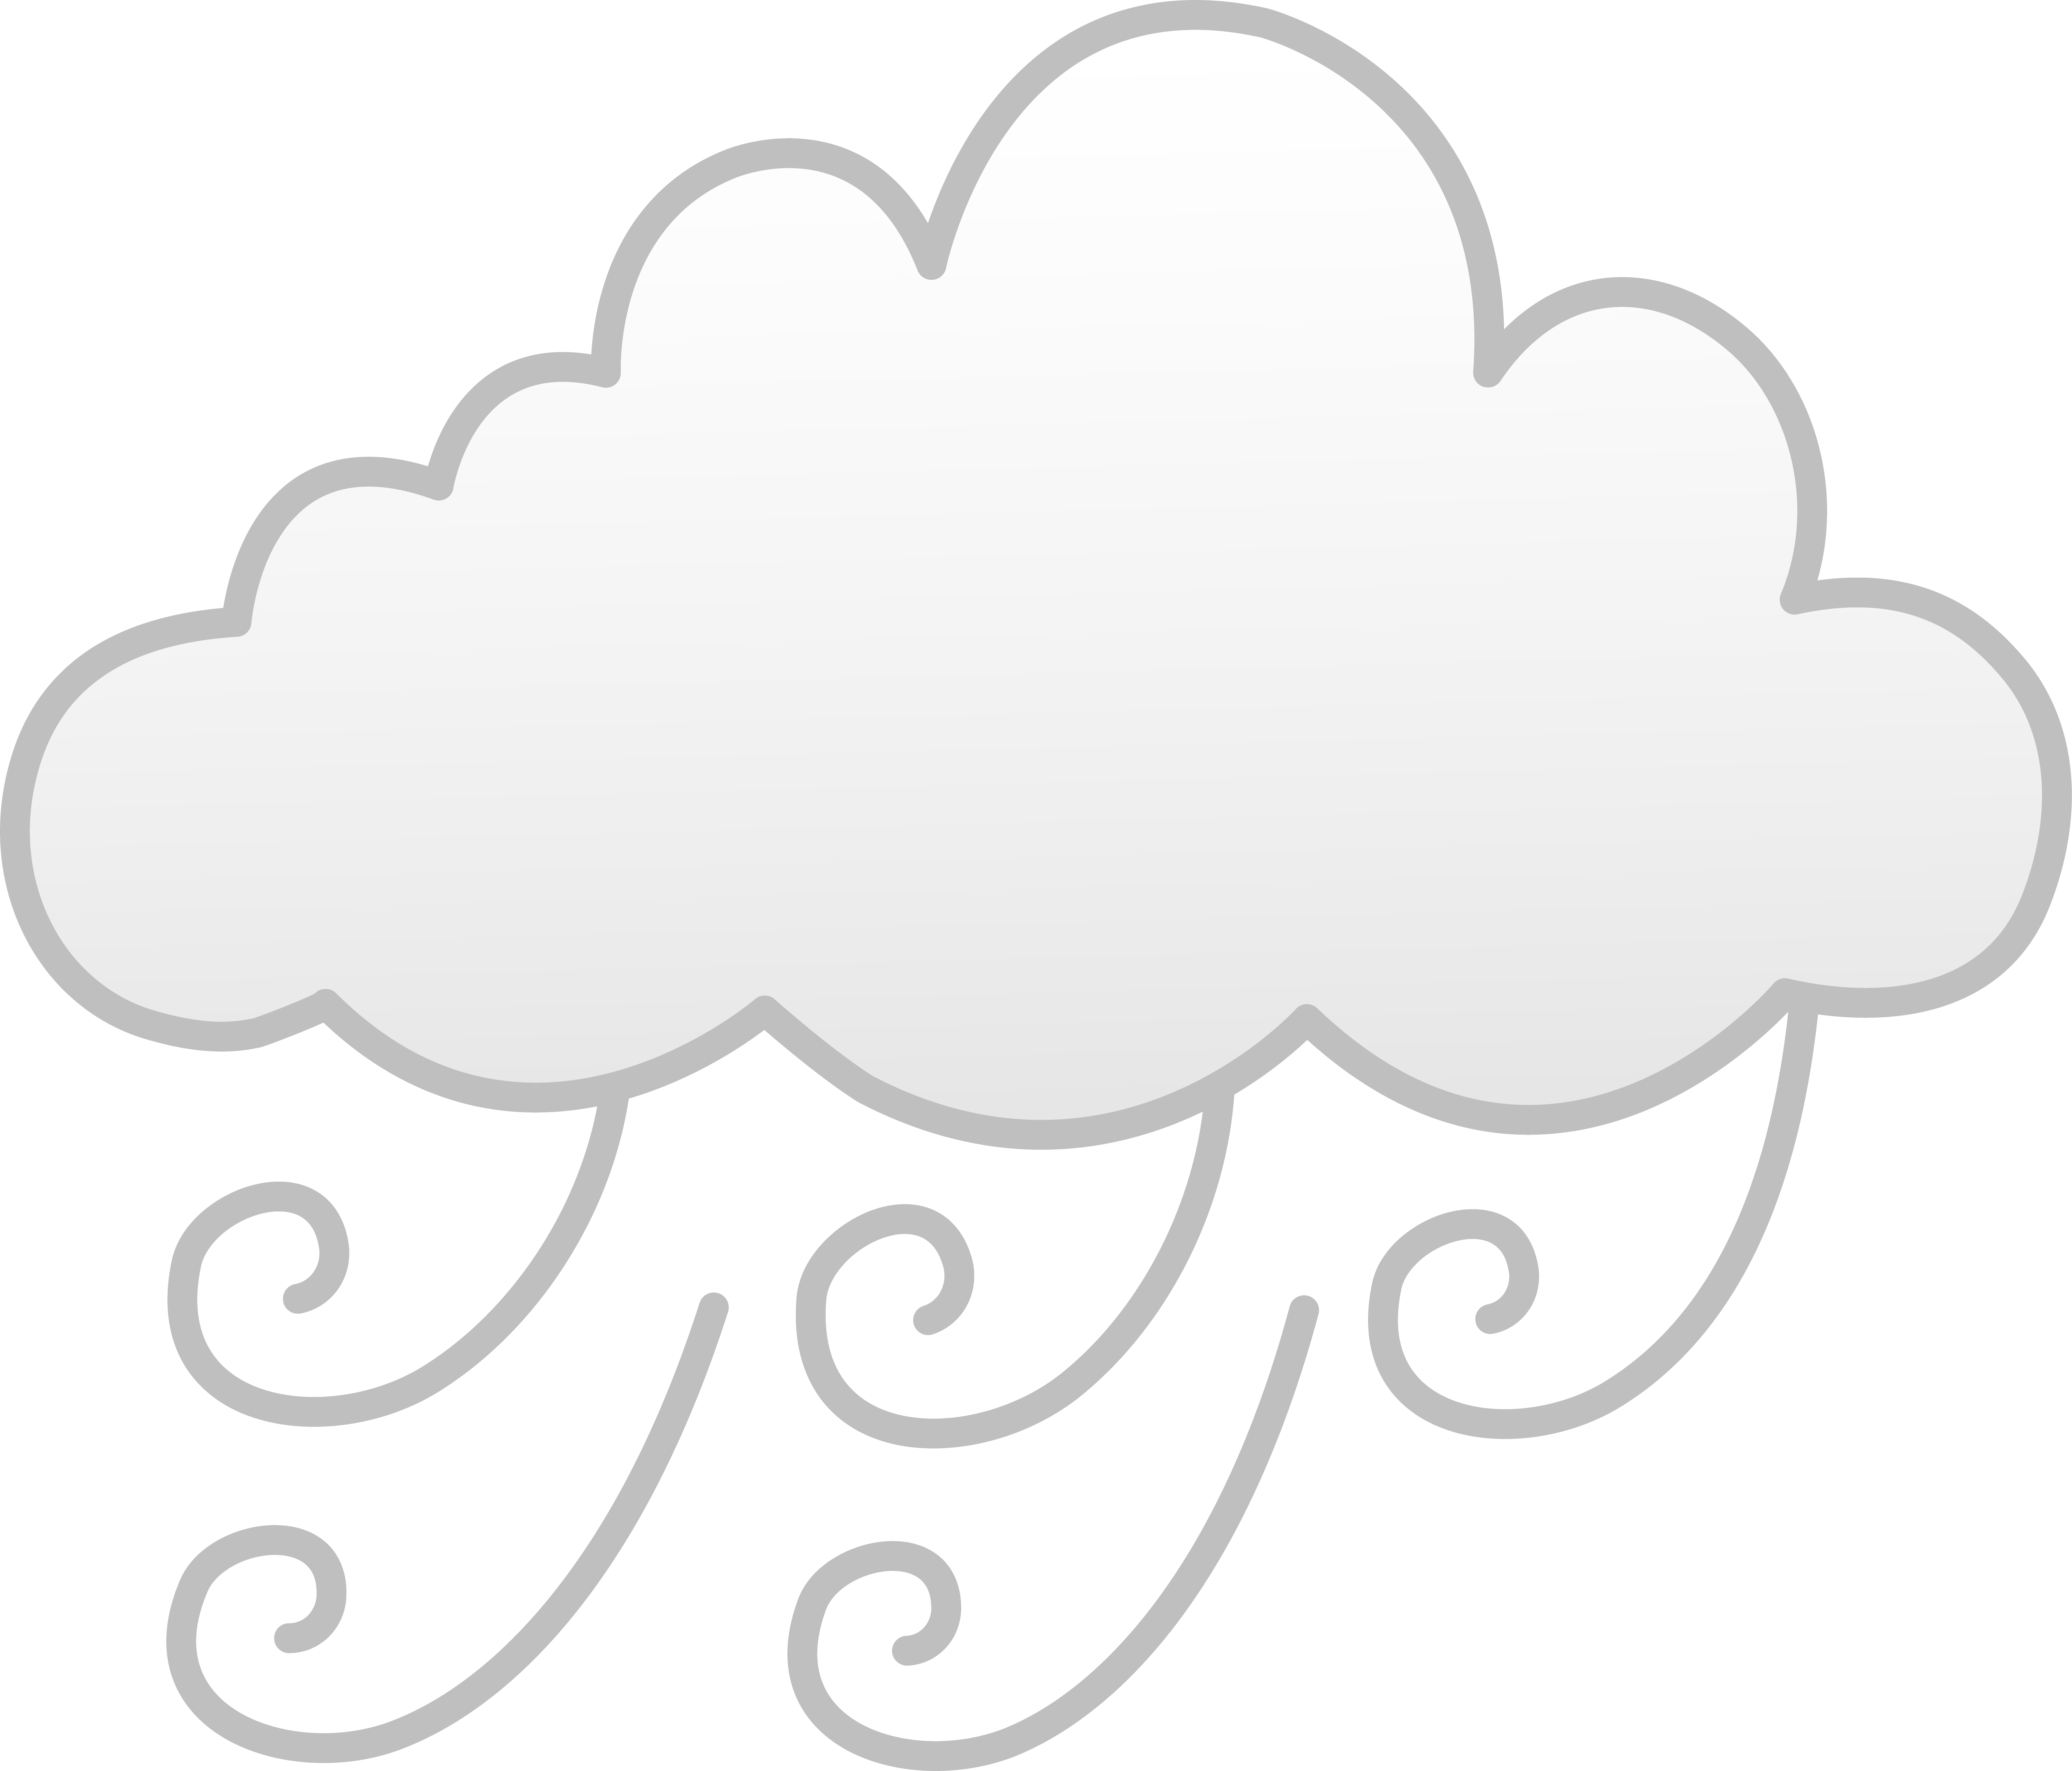 Clouds clip art cliparts. Wheel clipart animated